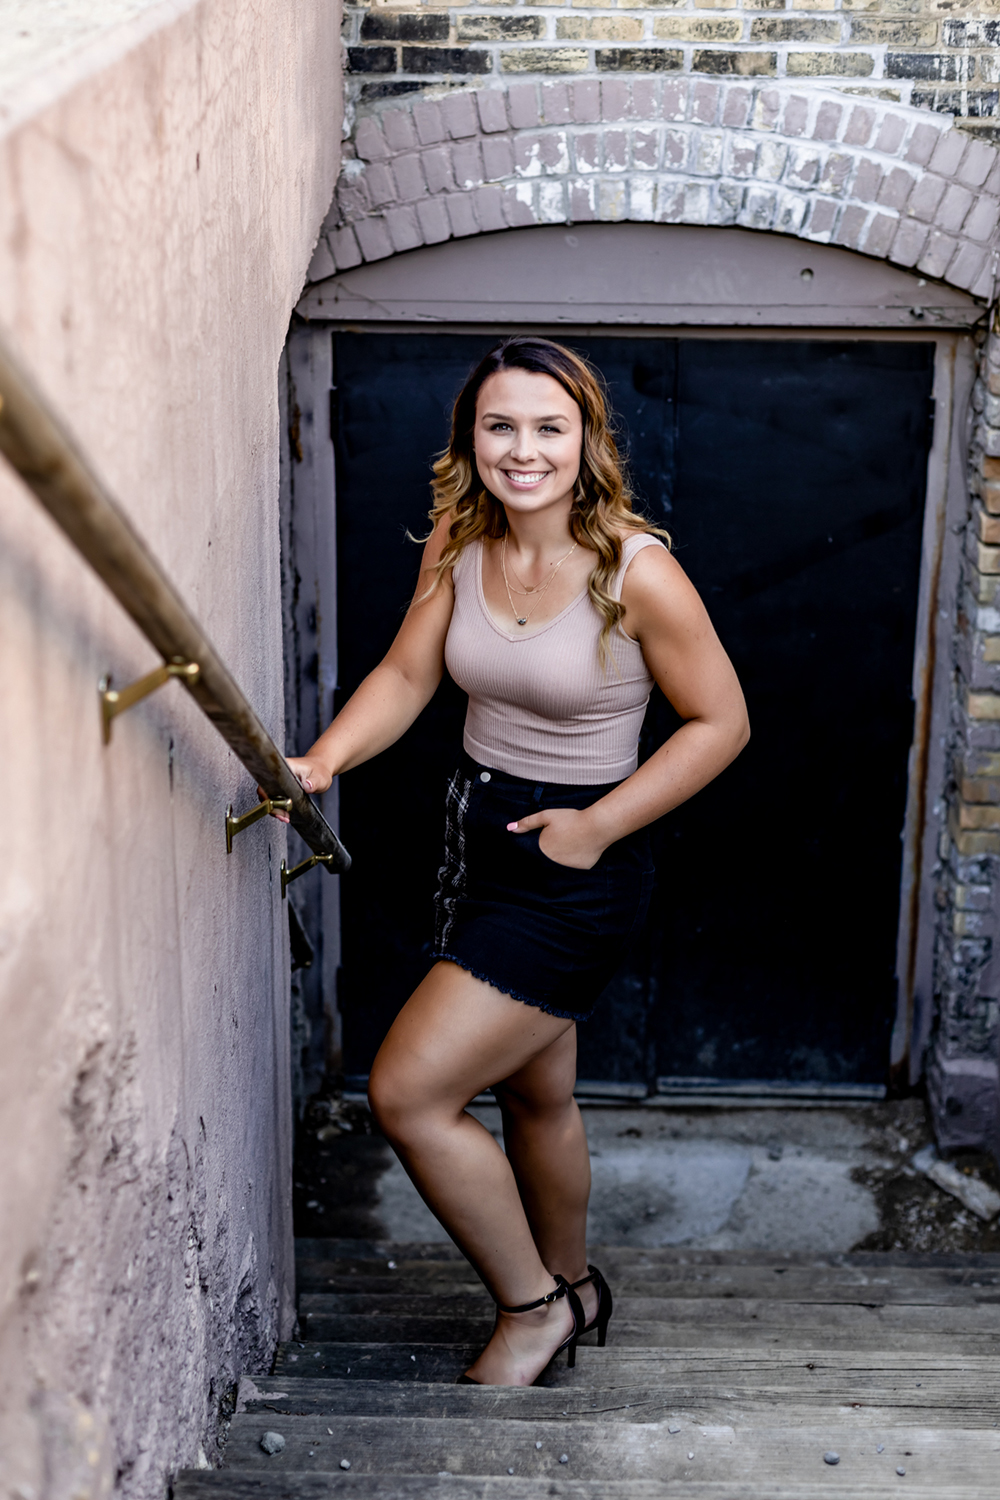 teenage girl poses in a stairwell wearing a black skirt